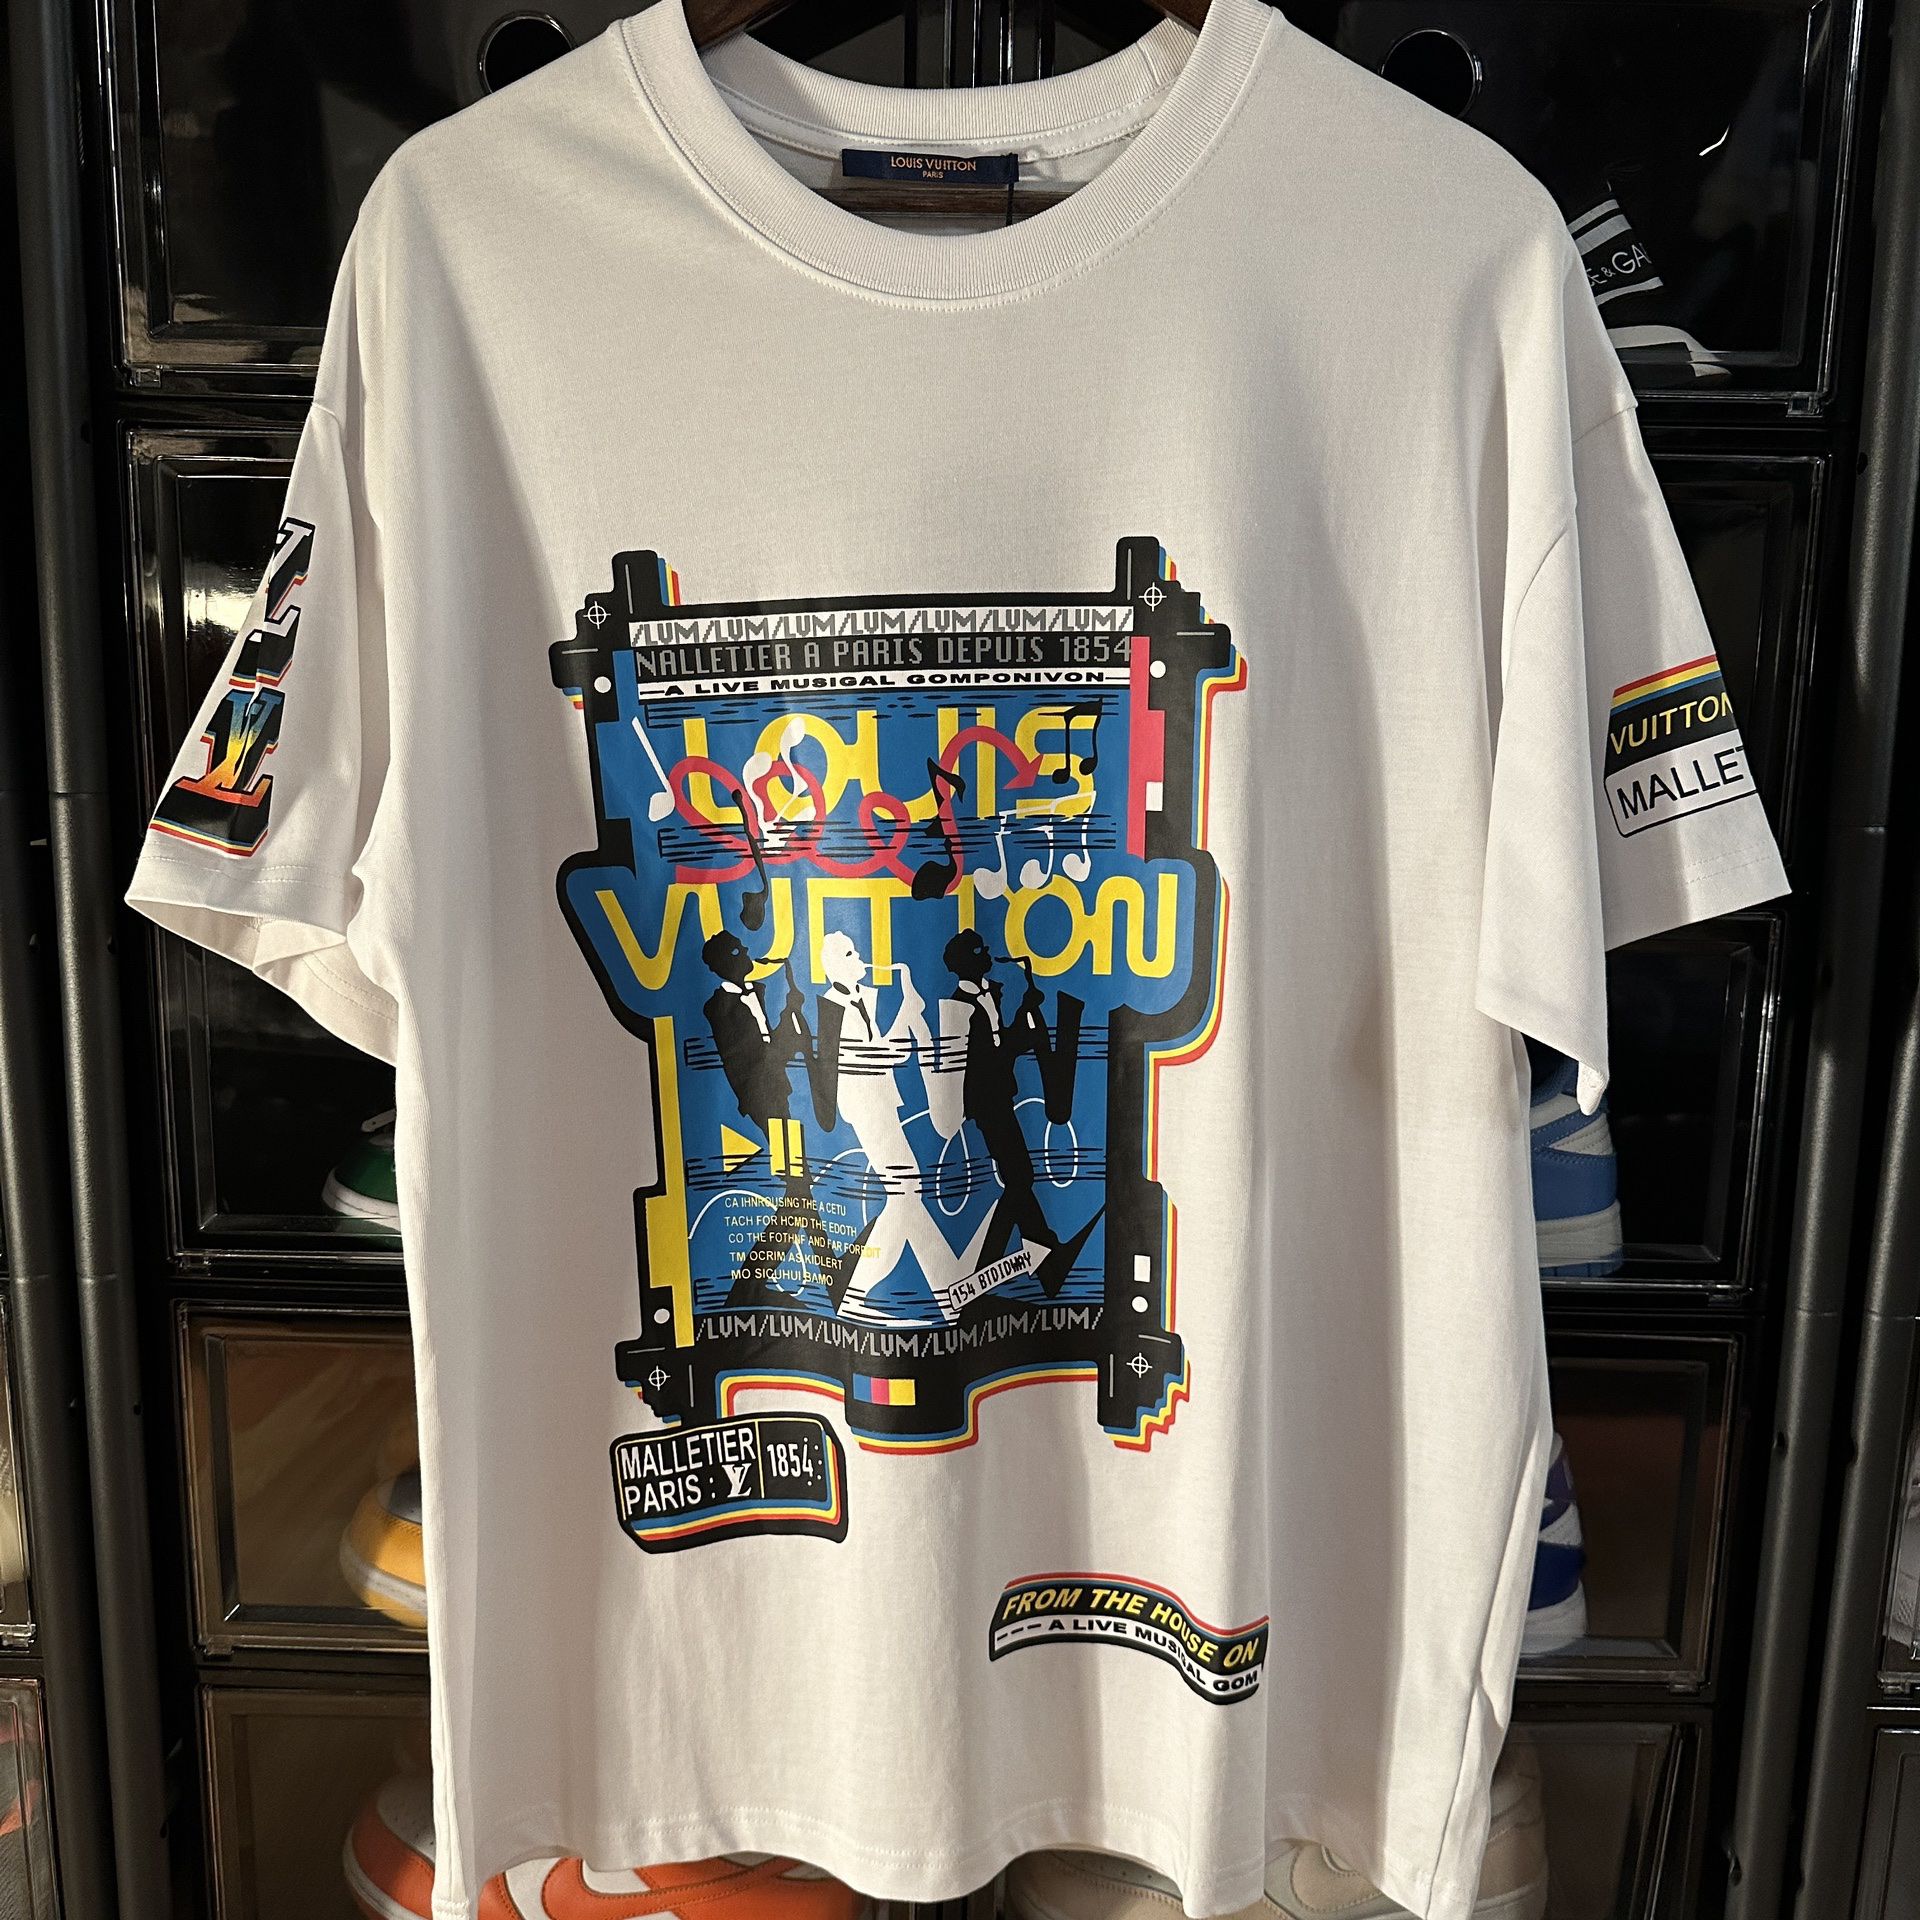 Men's Louis Vuitton Comic Intarsia T-Shirt Size Large for Sale in Oakland,  FL - OfferUp